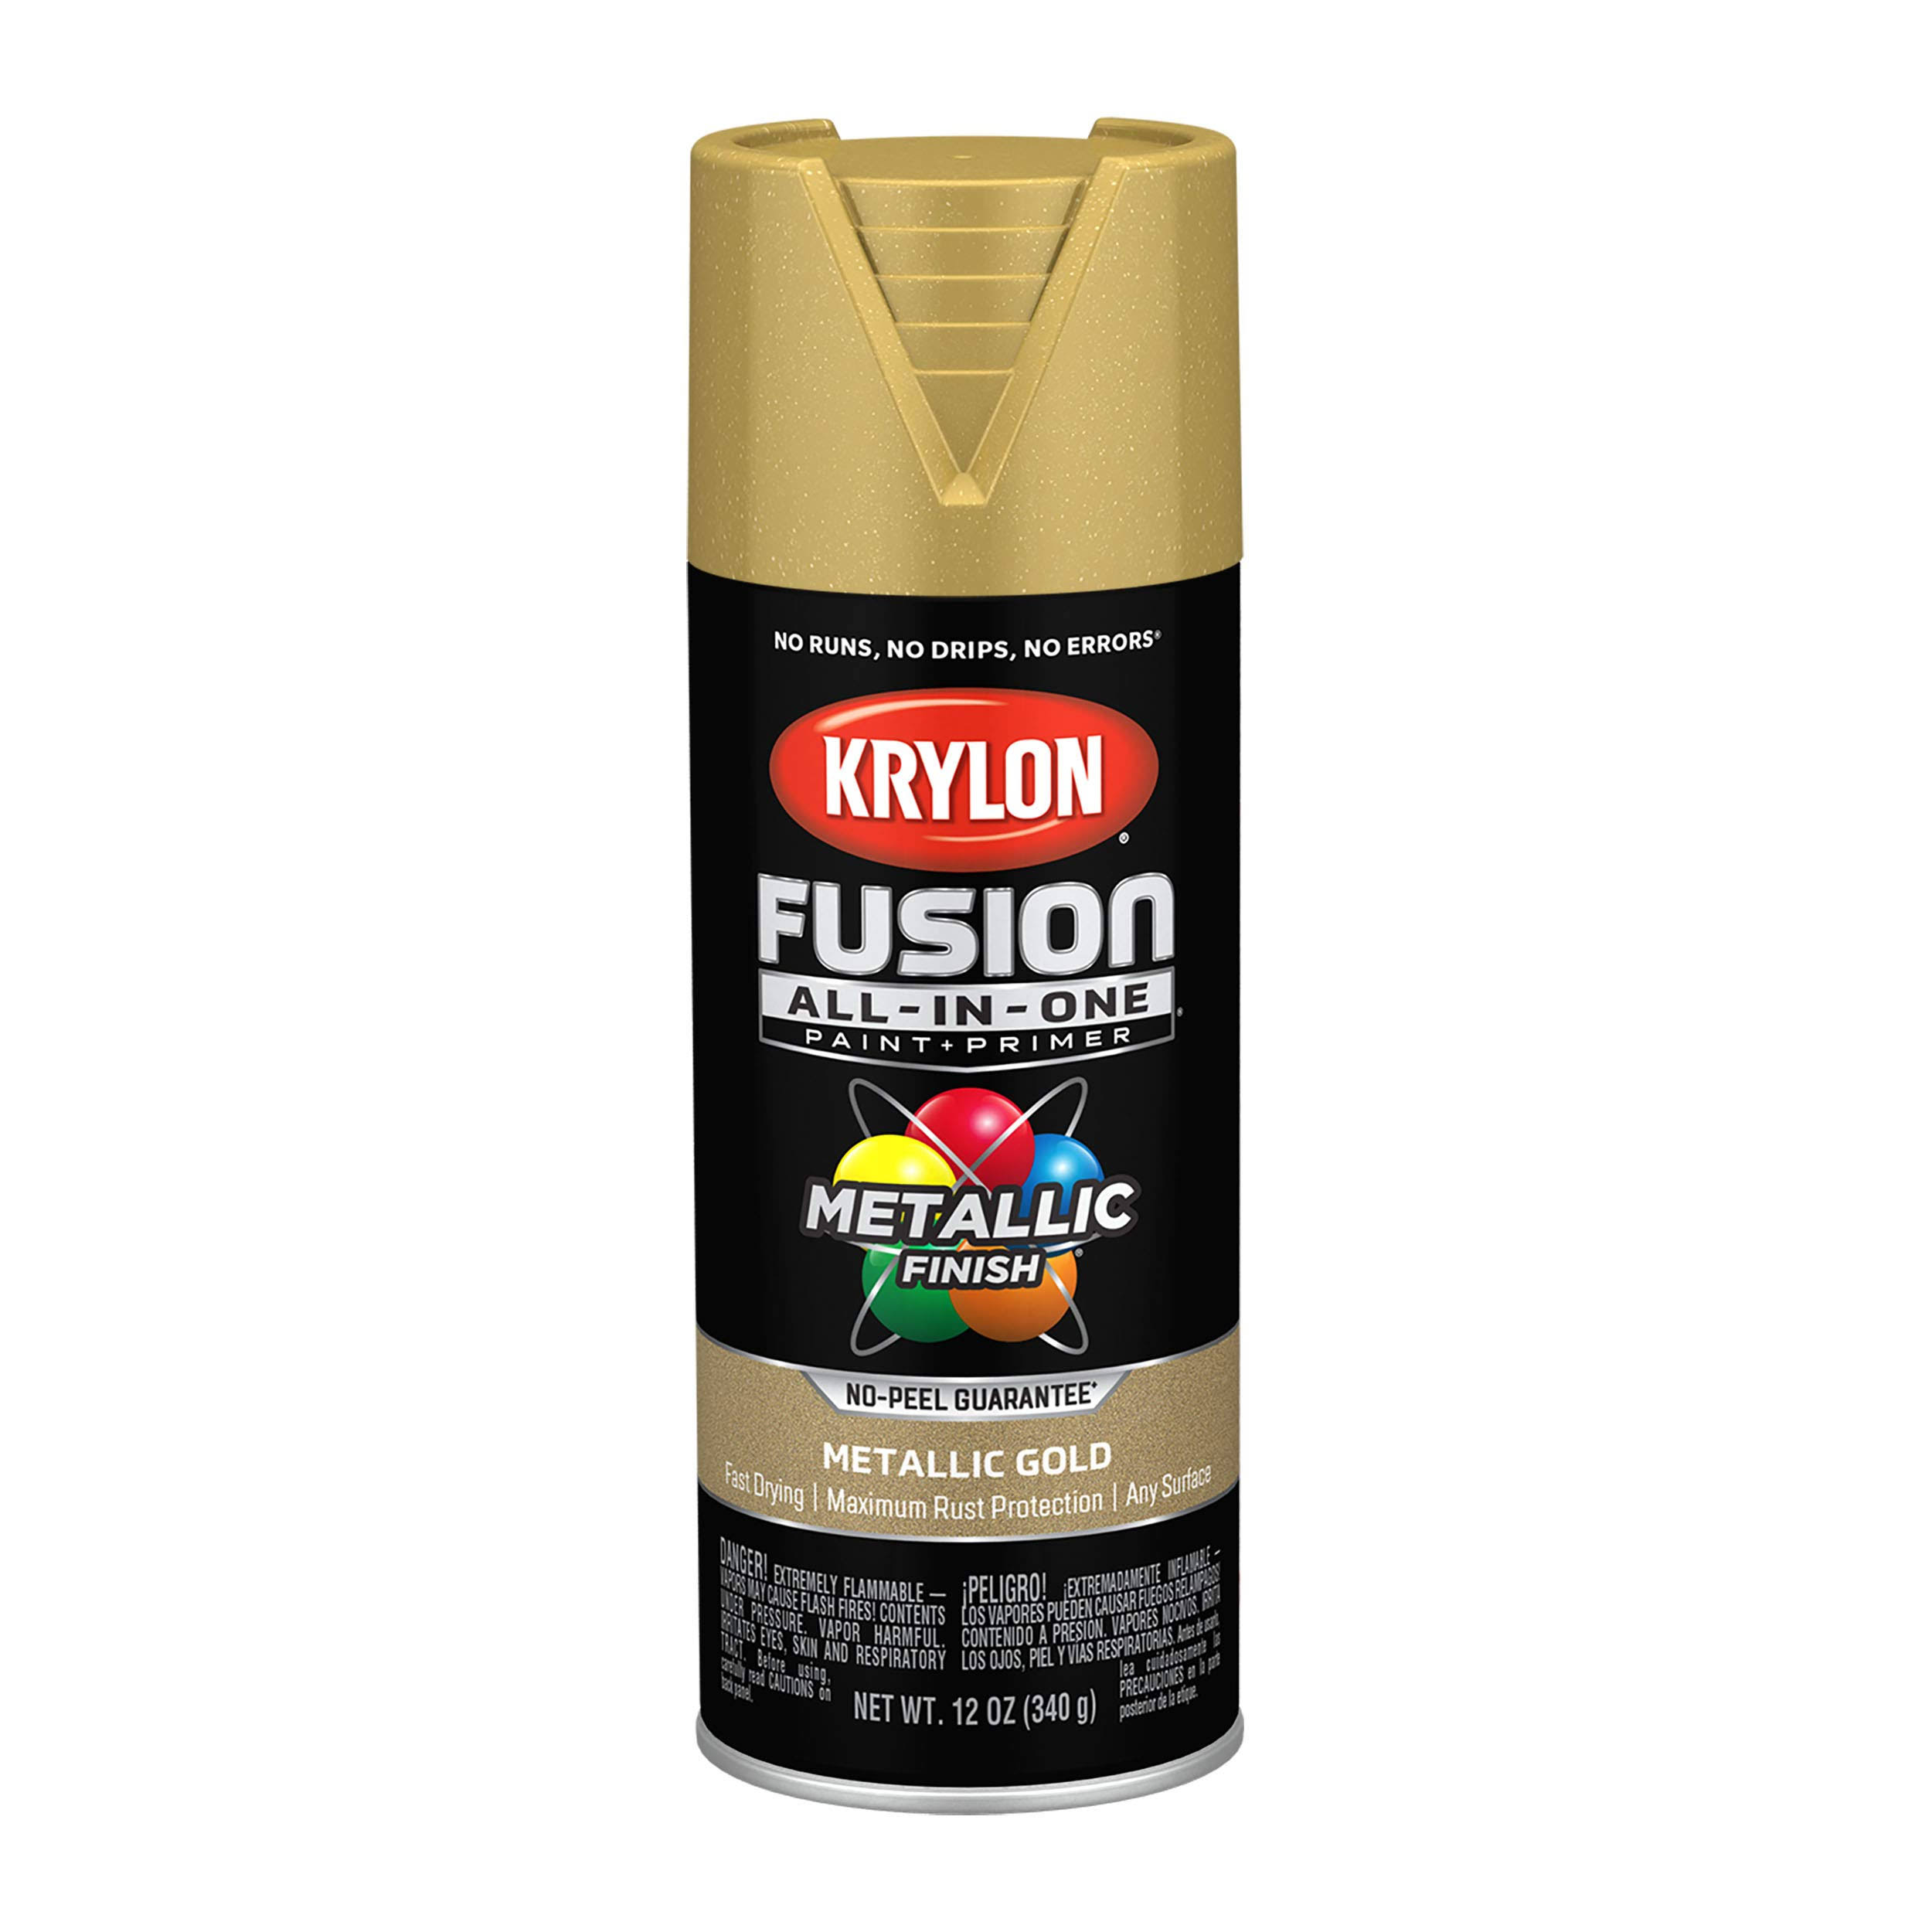 Krylon Fusion All In One Spray Paint and Primer - Metallic Gold, 12oz